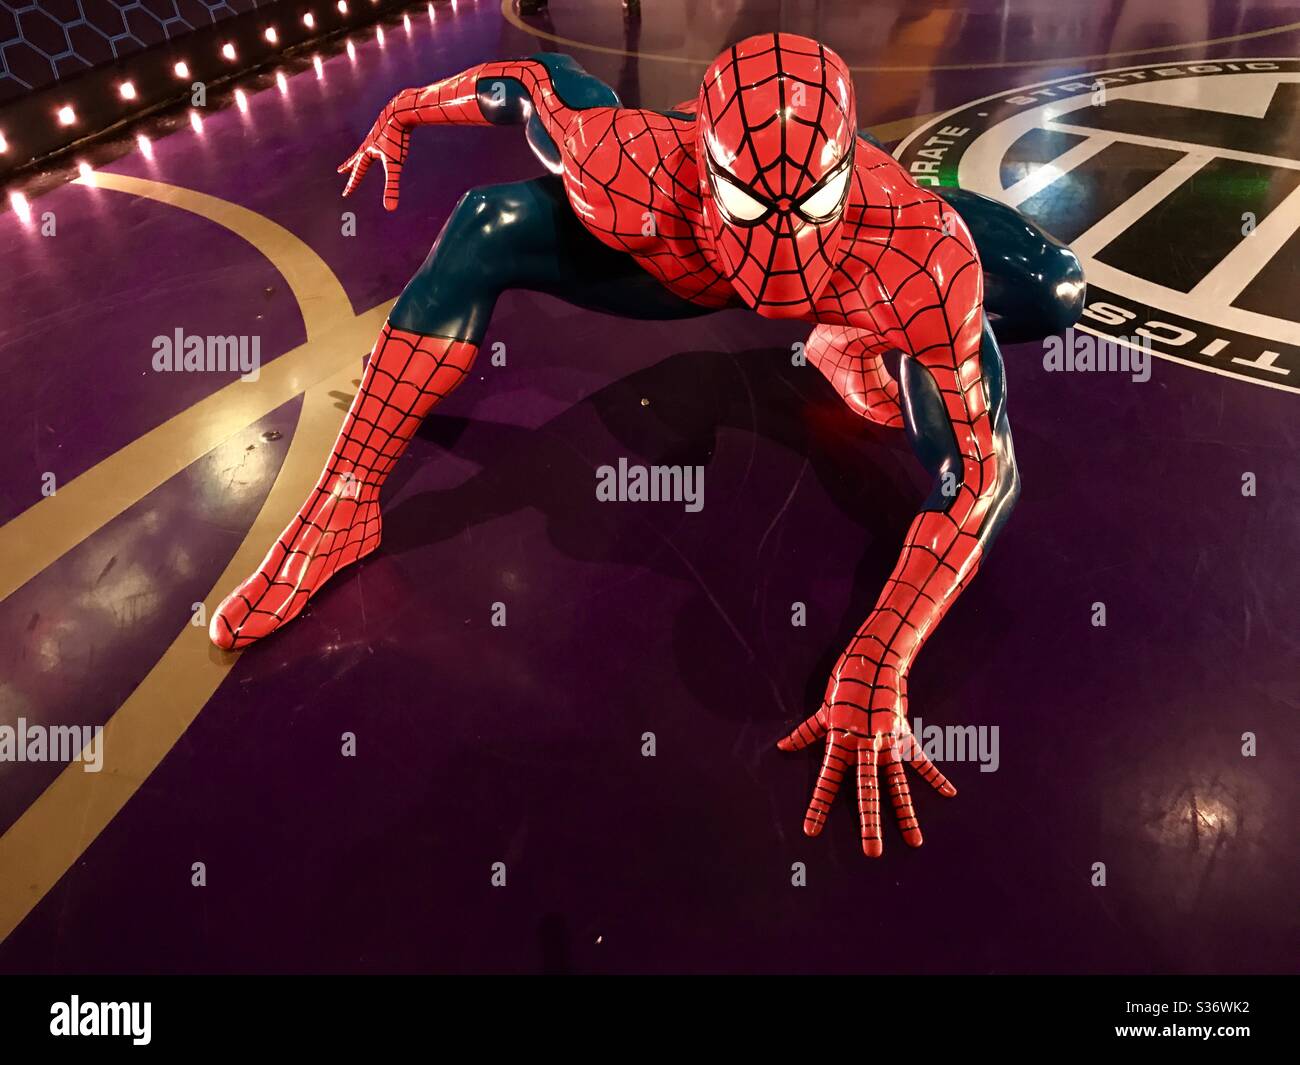 Hollywood, California/USA. August 4, 2019. Spiderman figure on display at Madame Tussaud's in Hollywood. Stock Photo